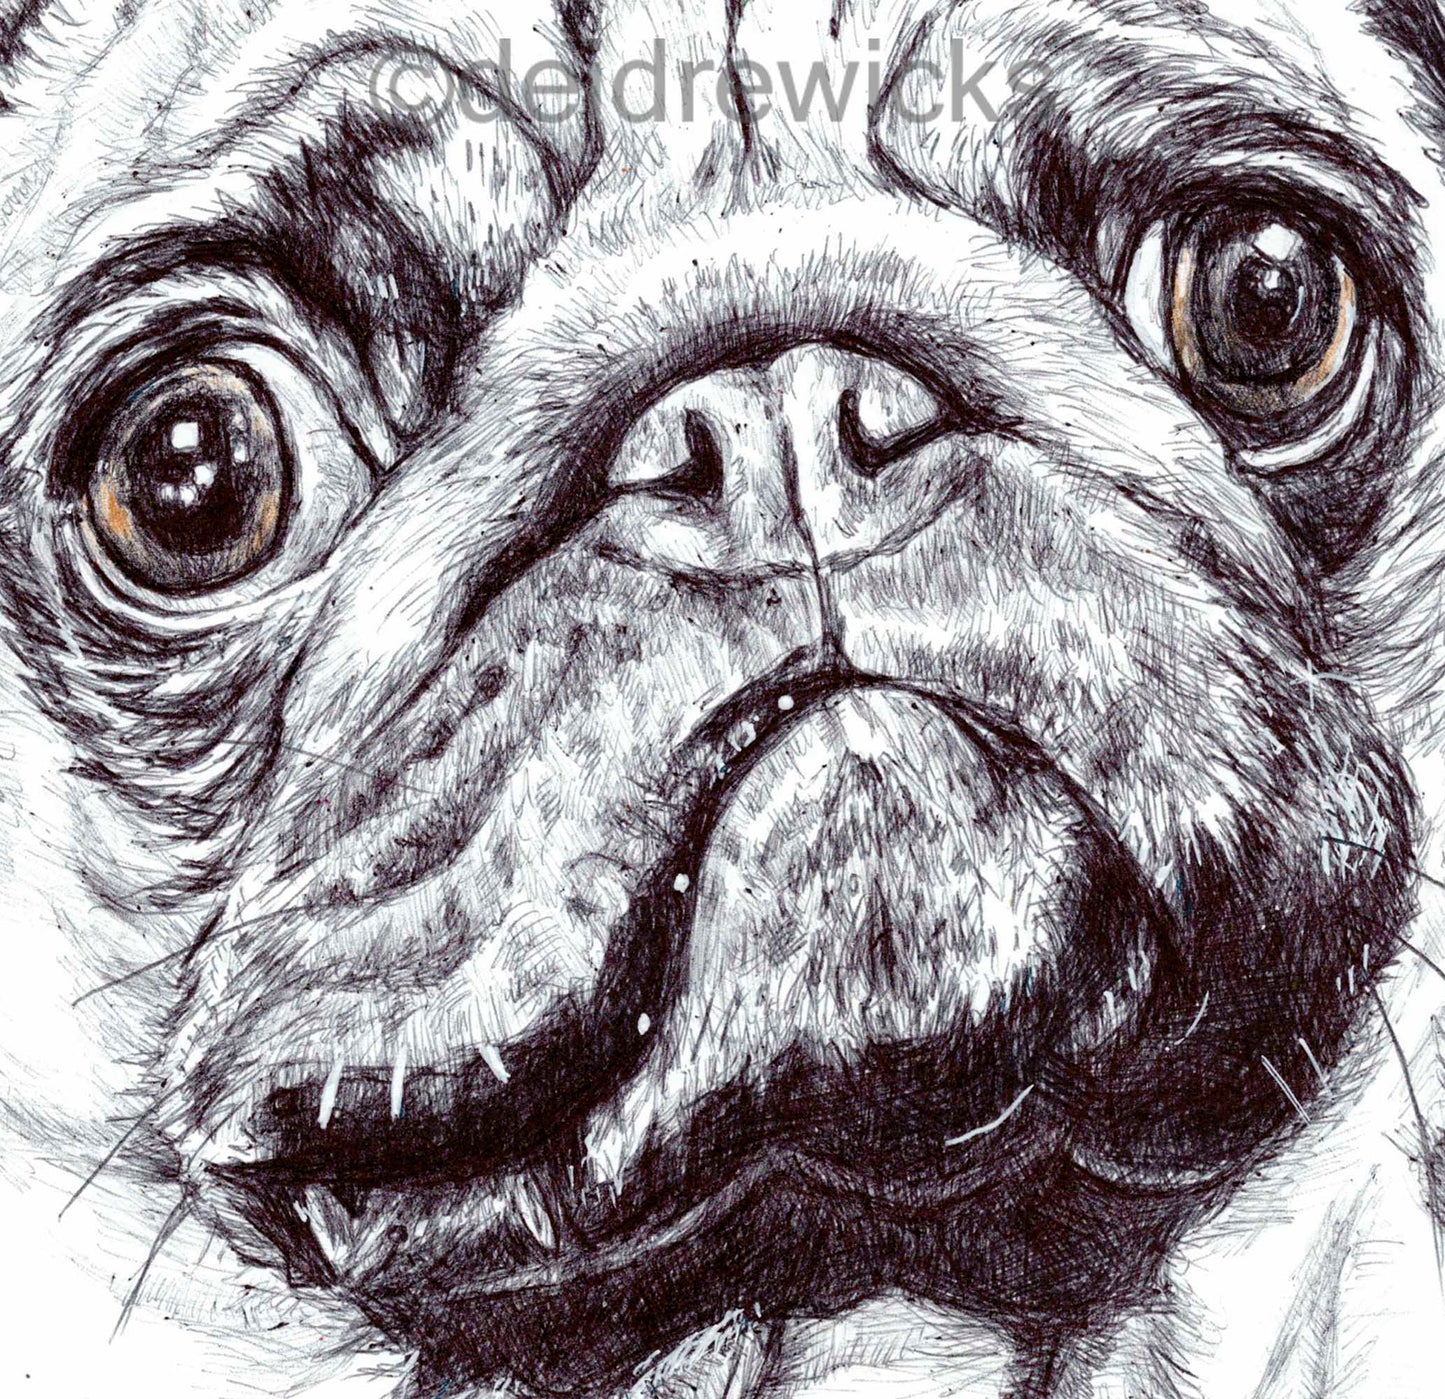 Close up of a drawing of a pug dog using ballpoint pen